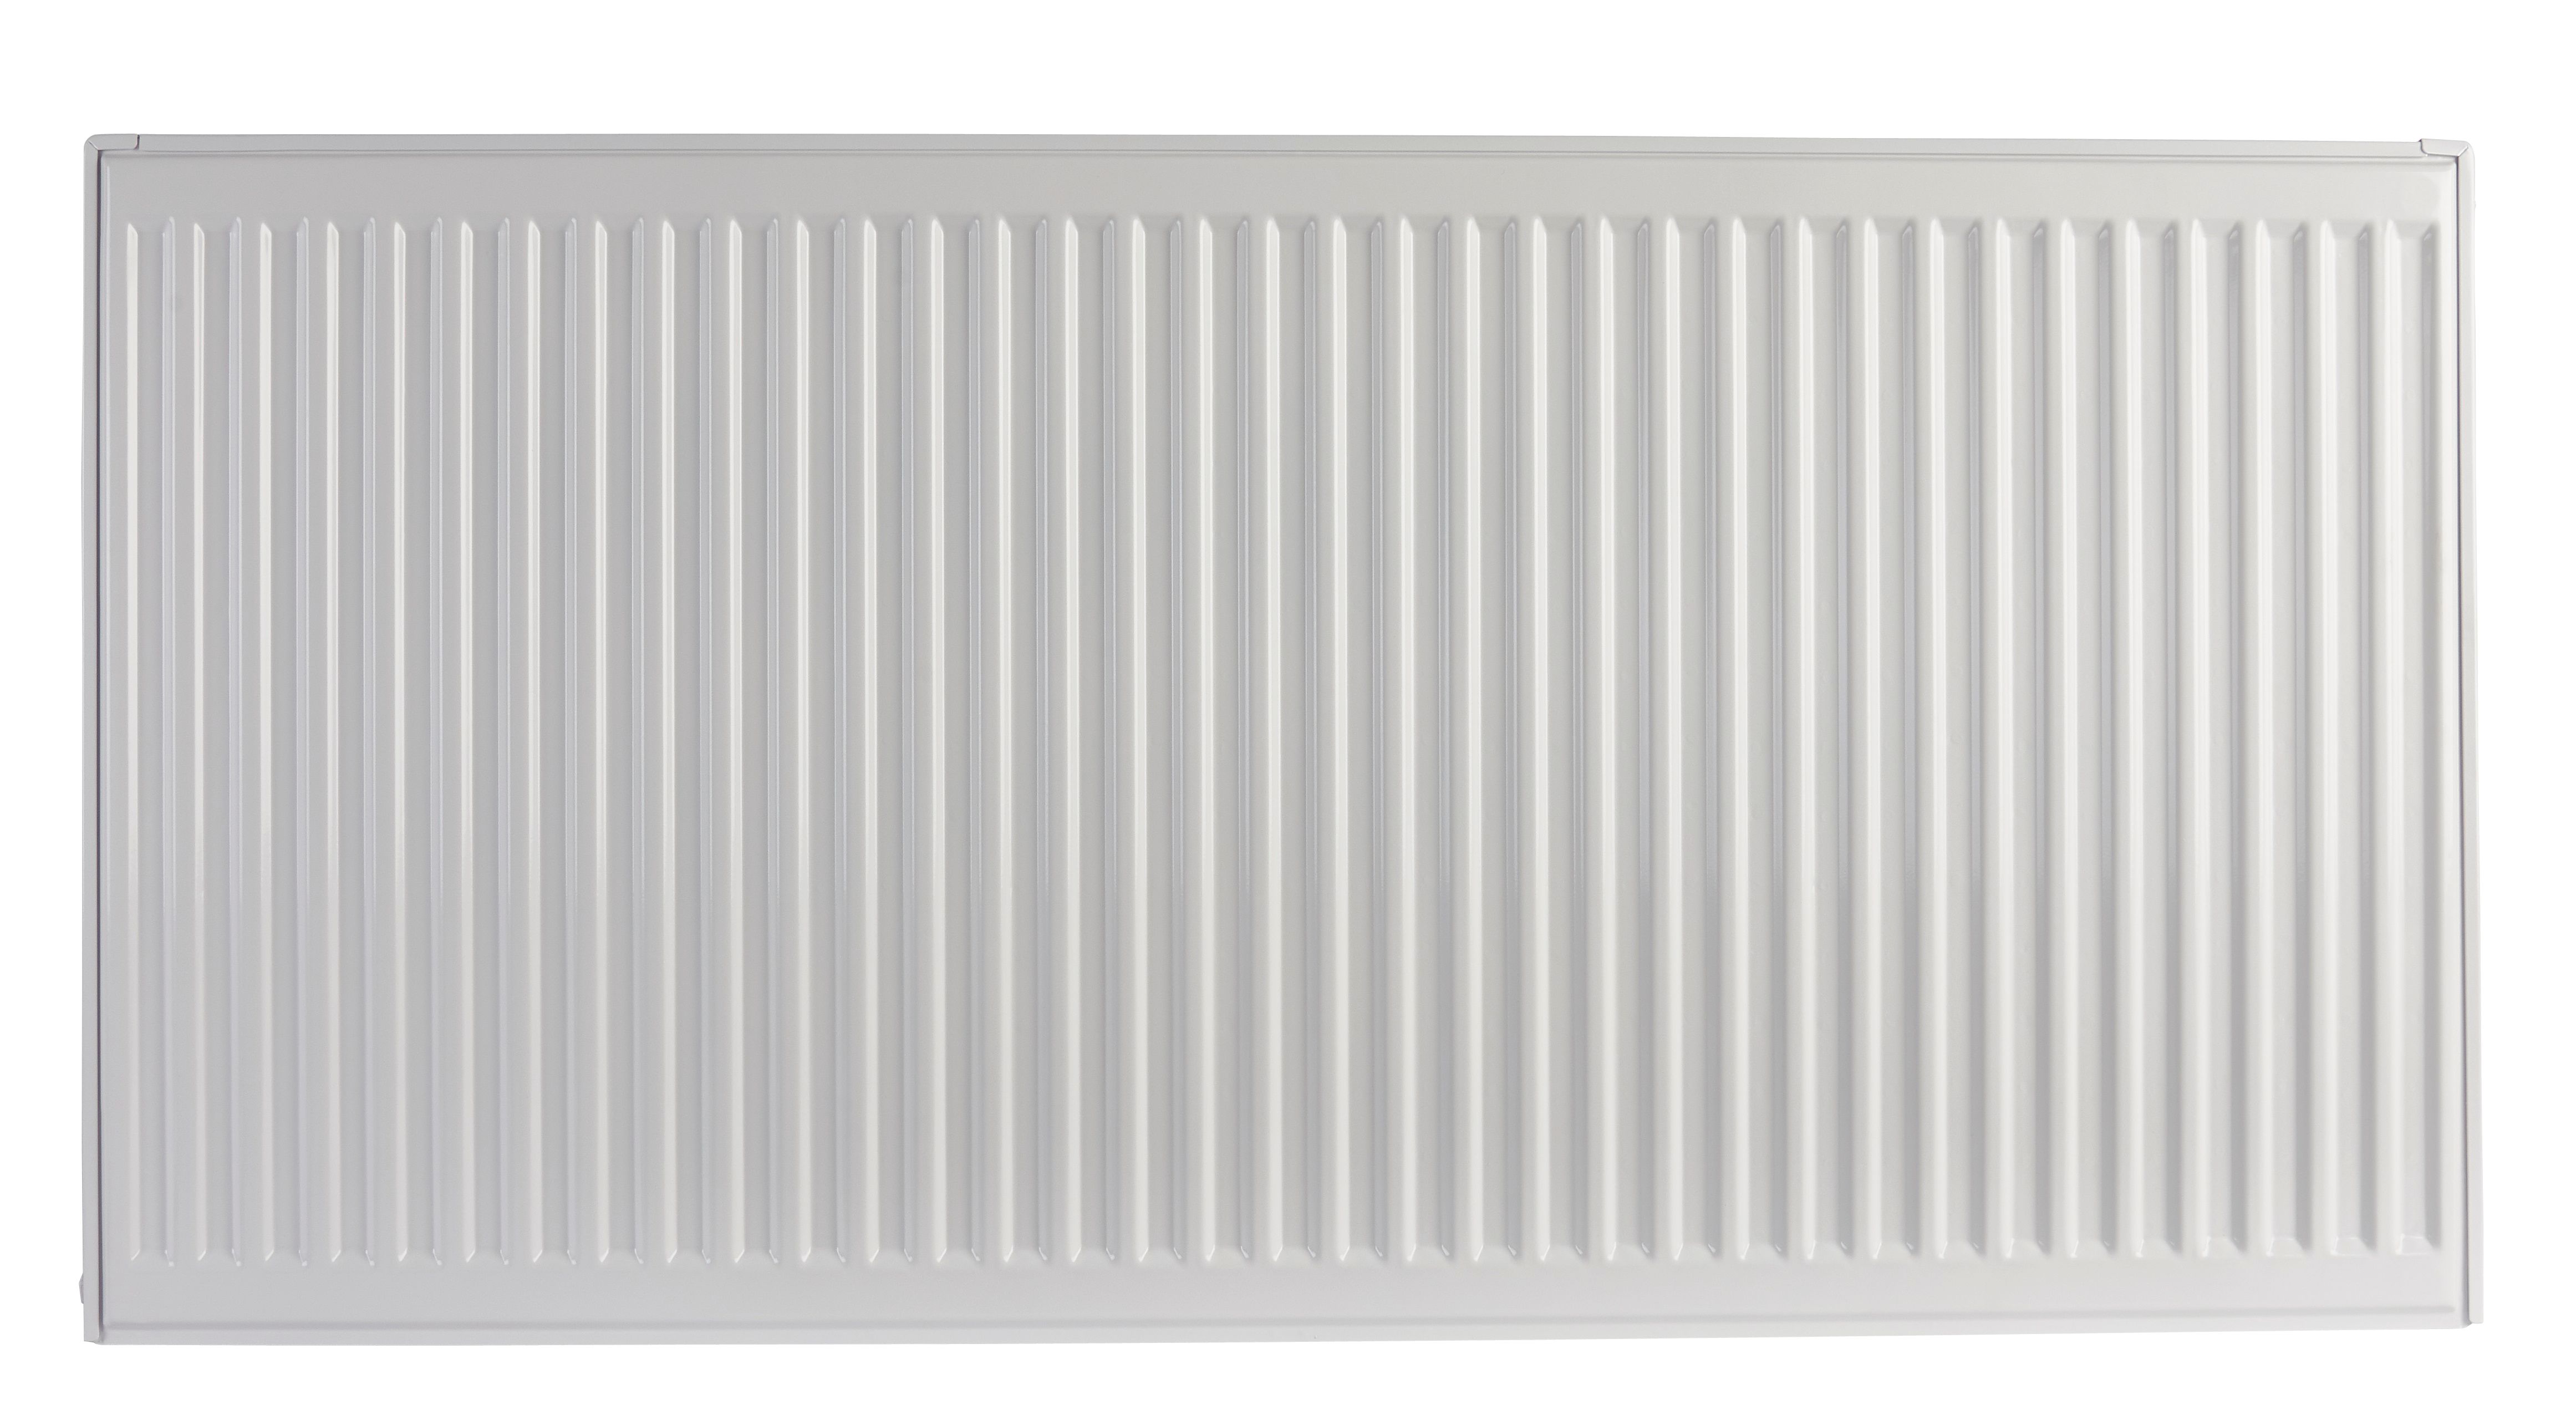 Image of Homeline by Stelrad 600 x 900mm Type 22 Double Panel Premium Double Convector Radiator